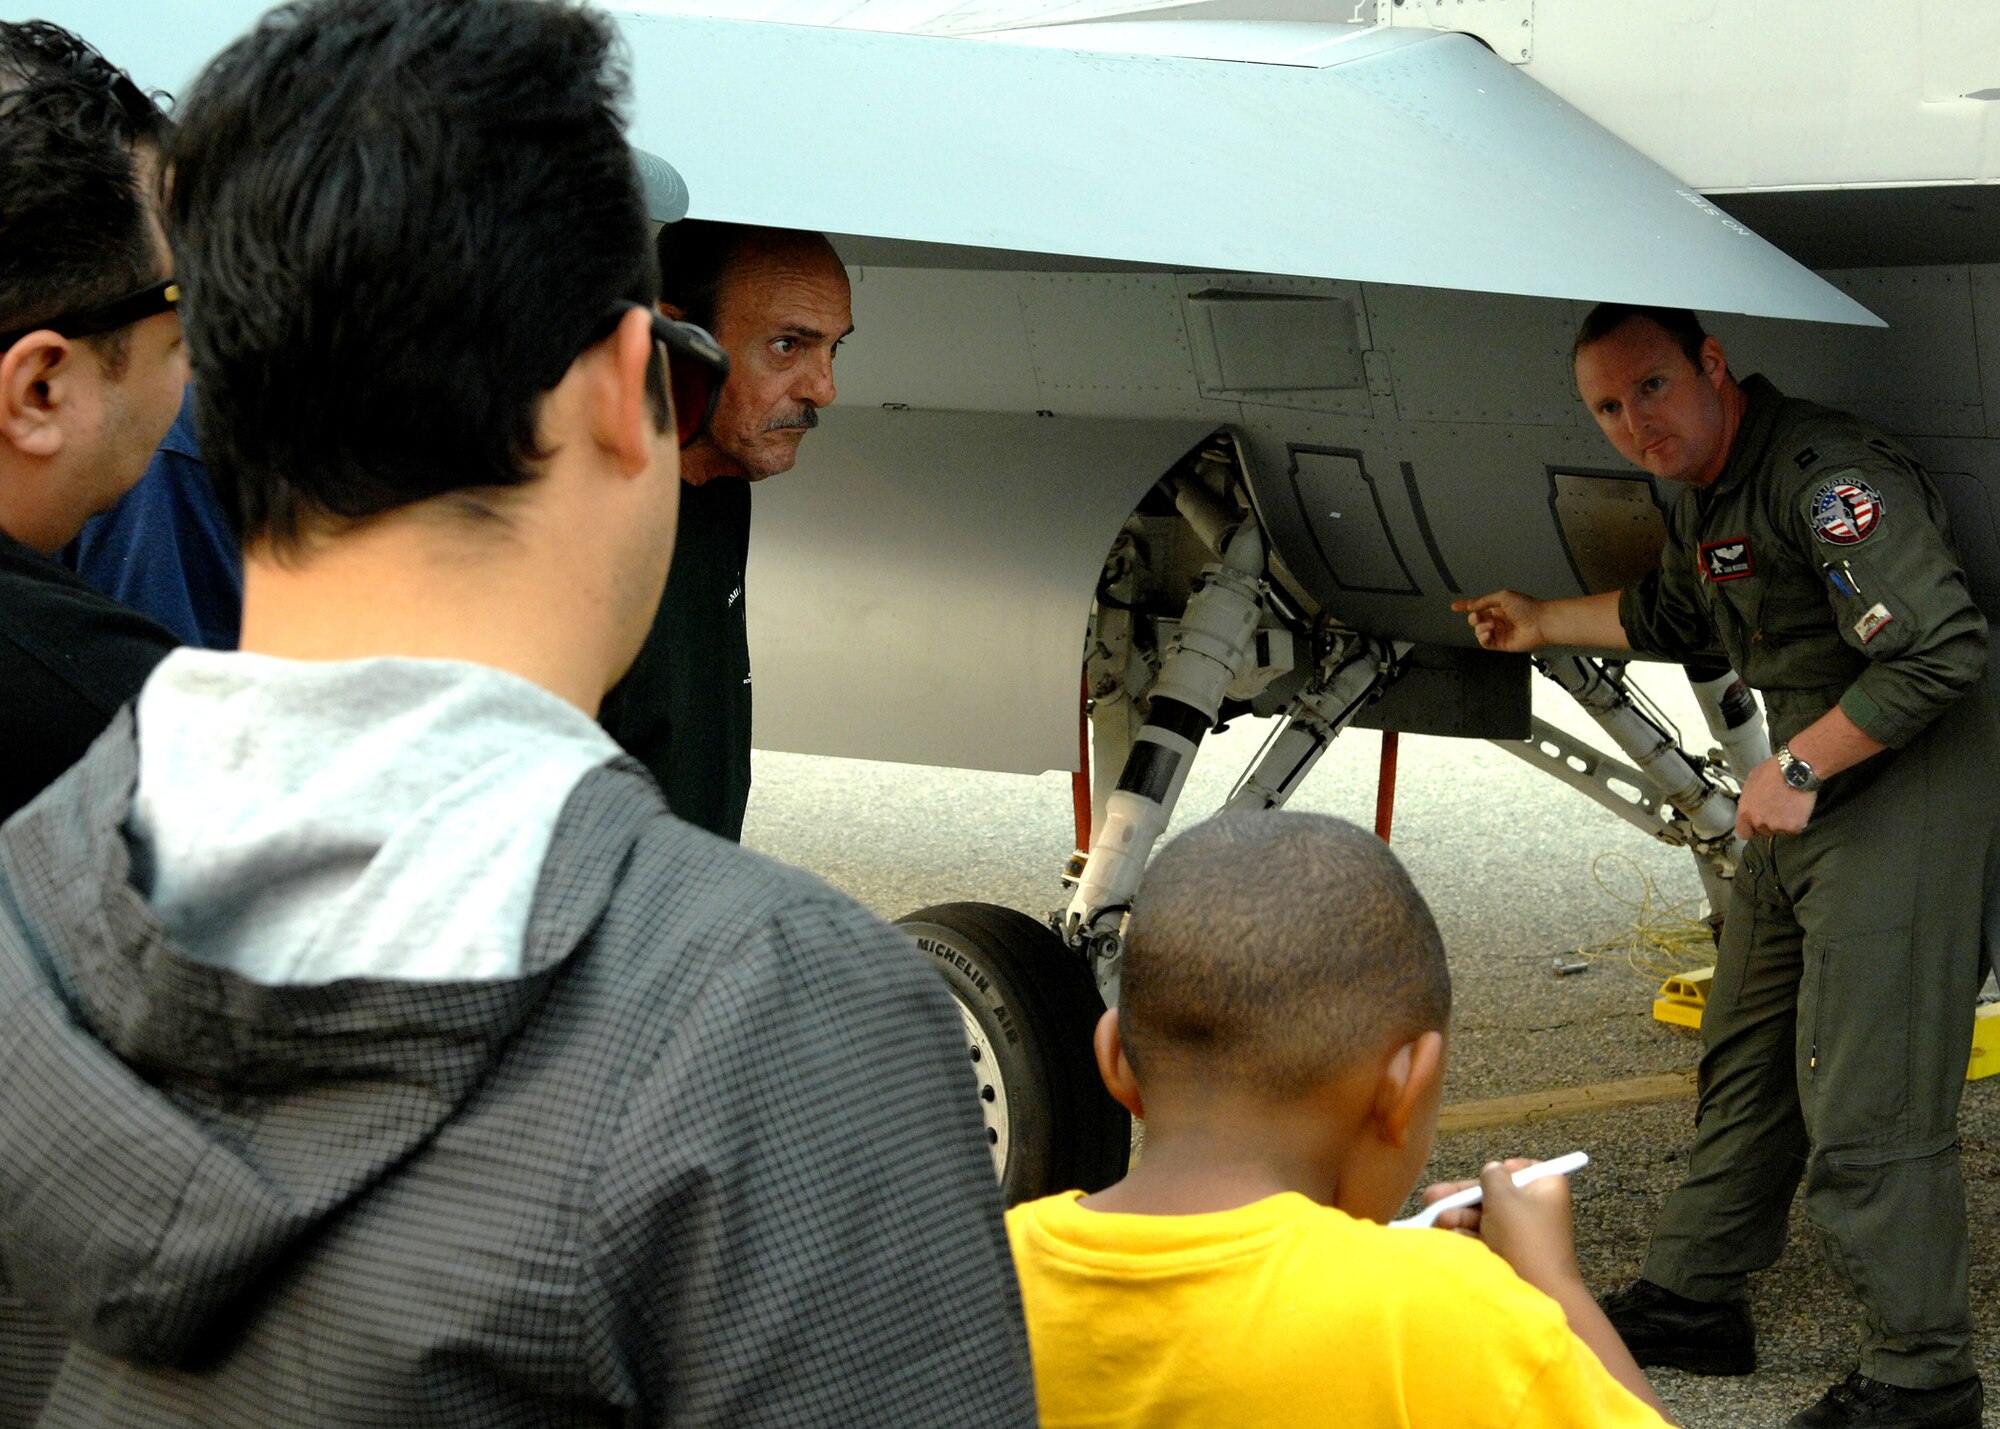 U.S. Air Force Captain Dan Woodside, a pilot with the 194th Fighter Squadron, Fresno Air National Guard Base California talks to visitors about the F16C during Wings Over Long Beach at the Long Beach Airport, November 15, 2008.  (U.S. Air Force photo by Senior Airman Matthew Smith)